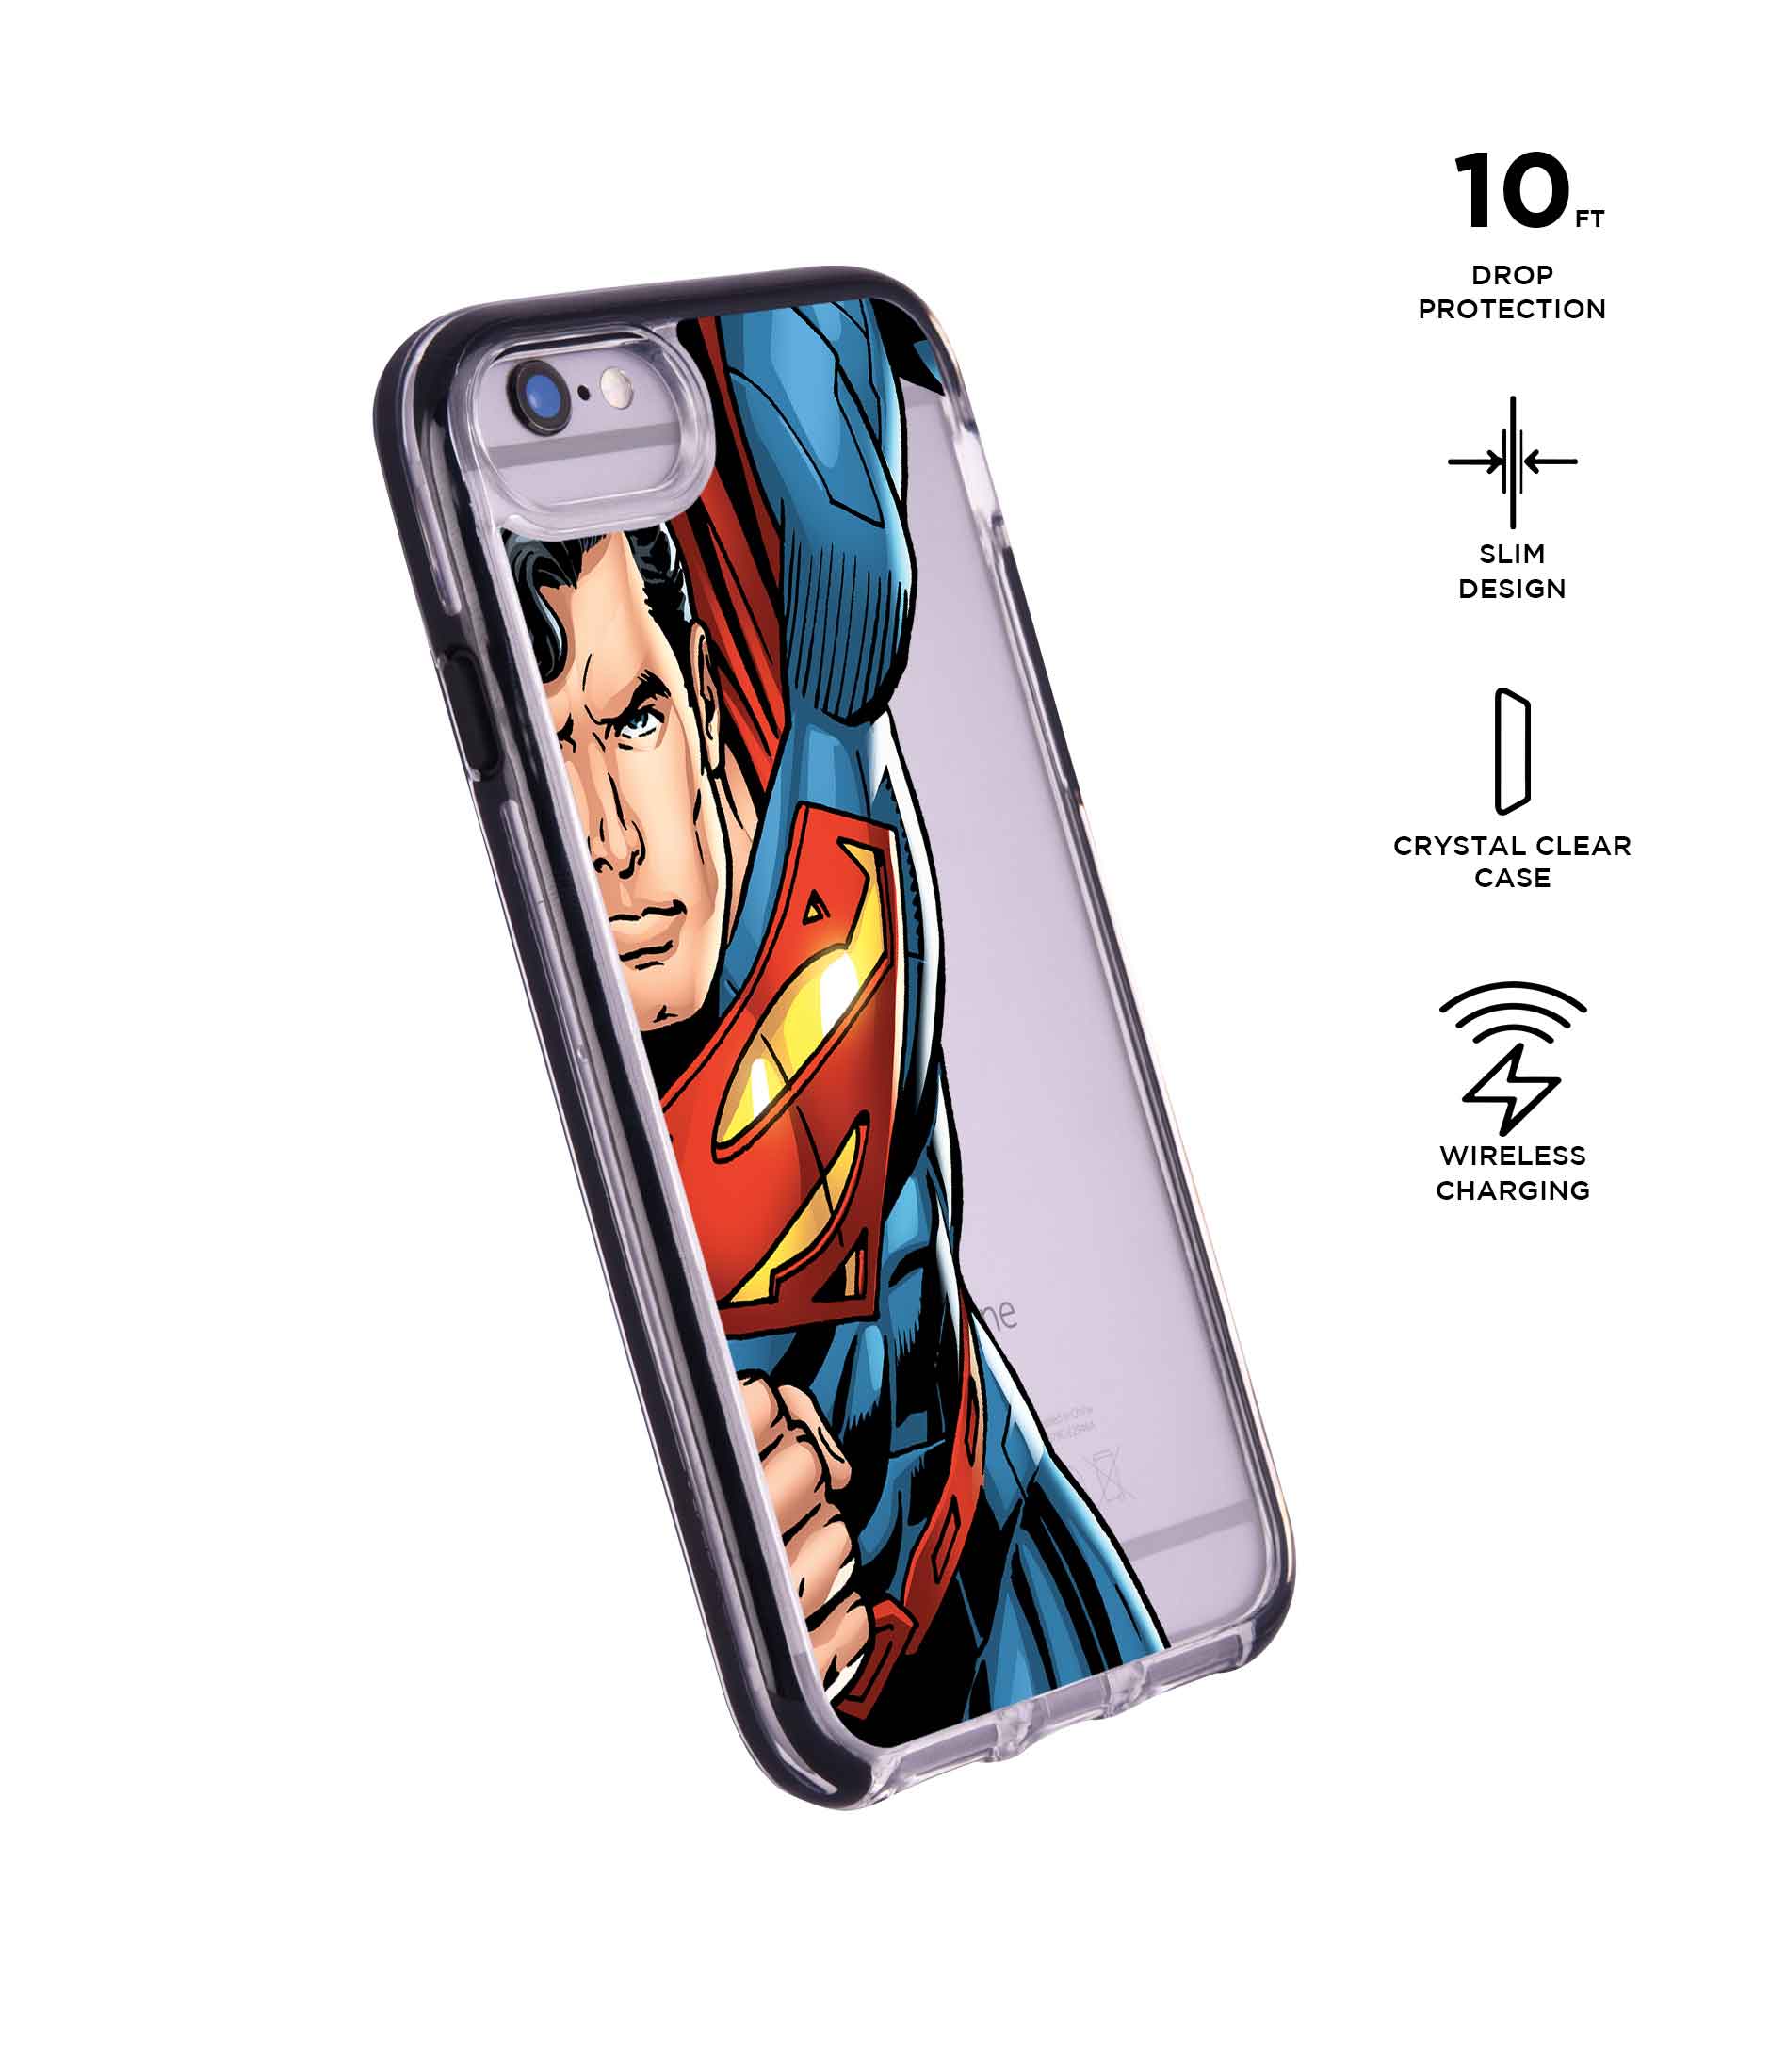 Speed it like Superman - Extreme Phone Case for iPhone 6